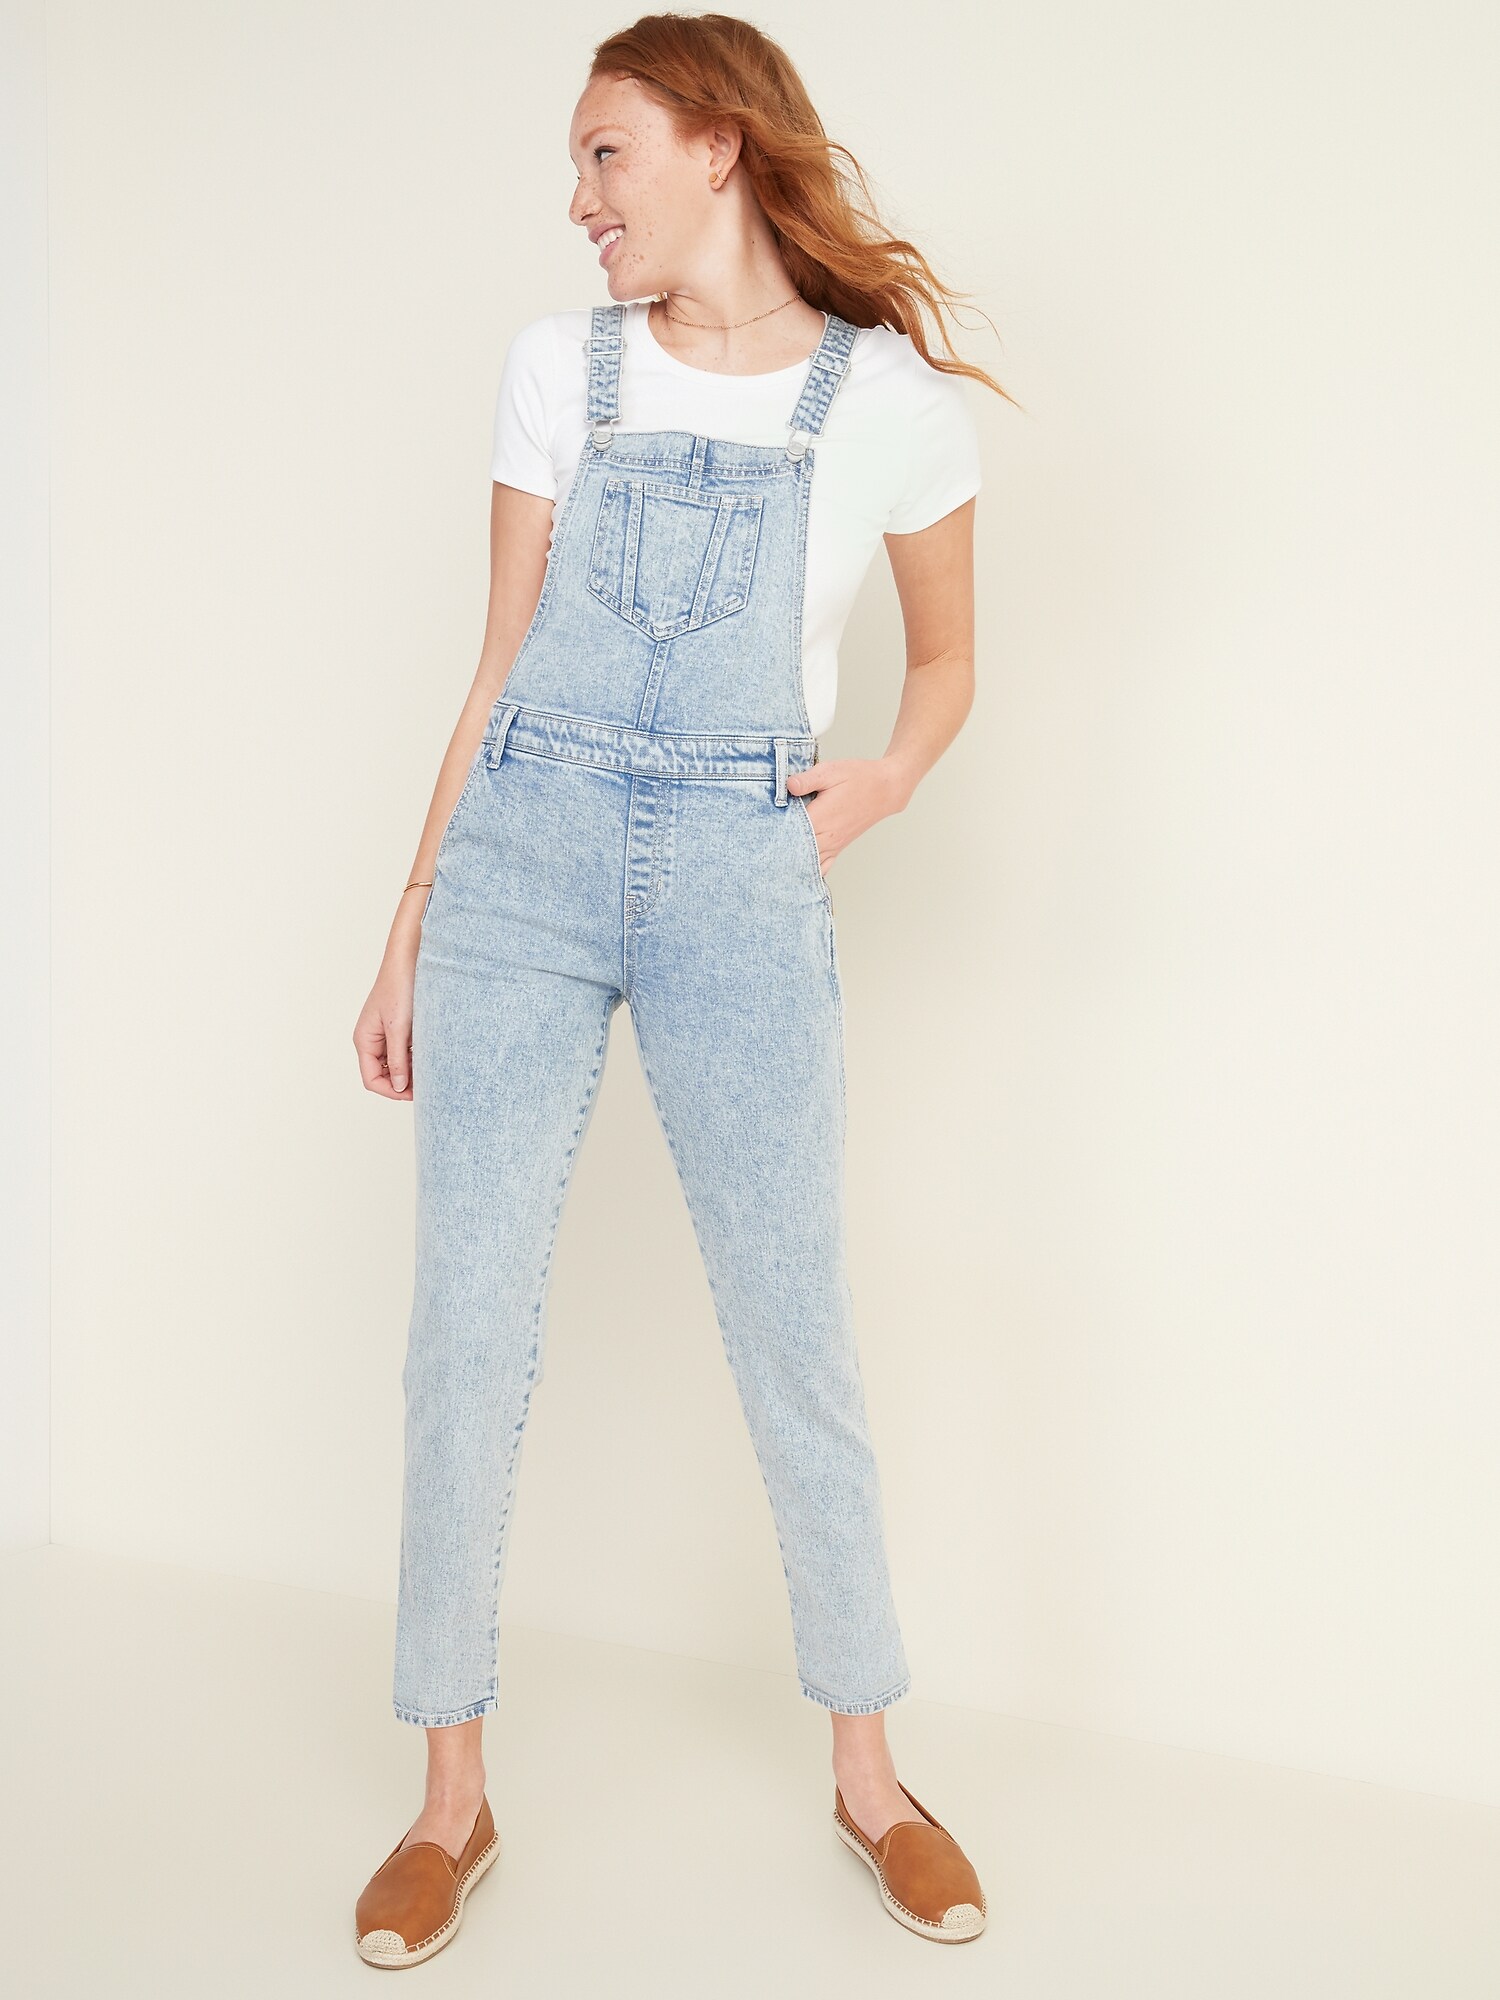 Stonewashed Jean Overalls for Women | Old Navy